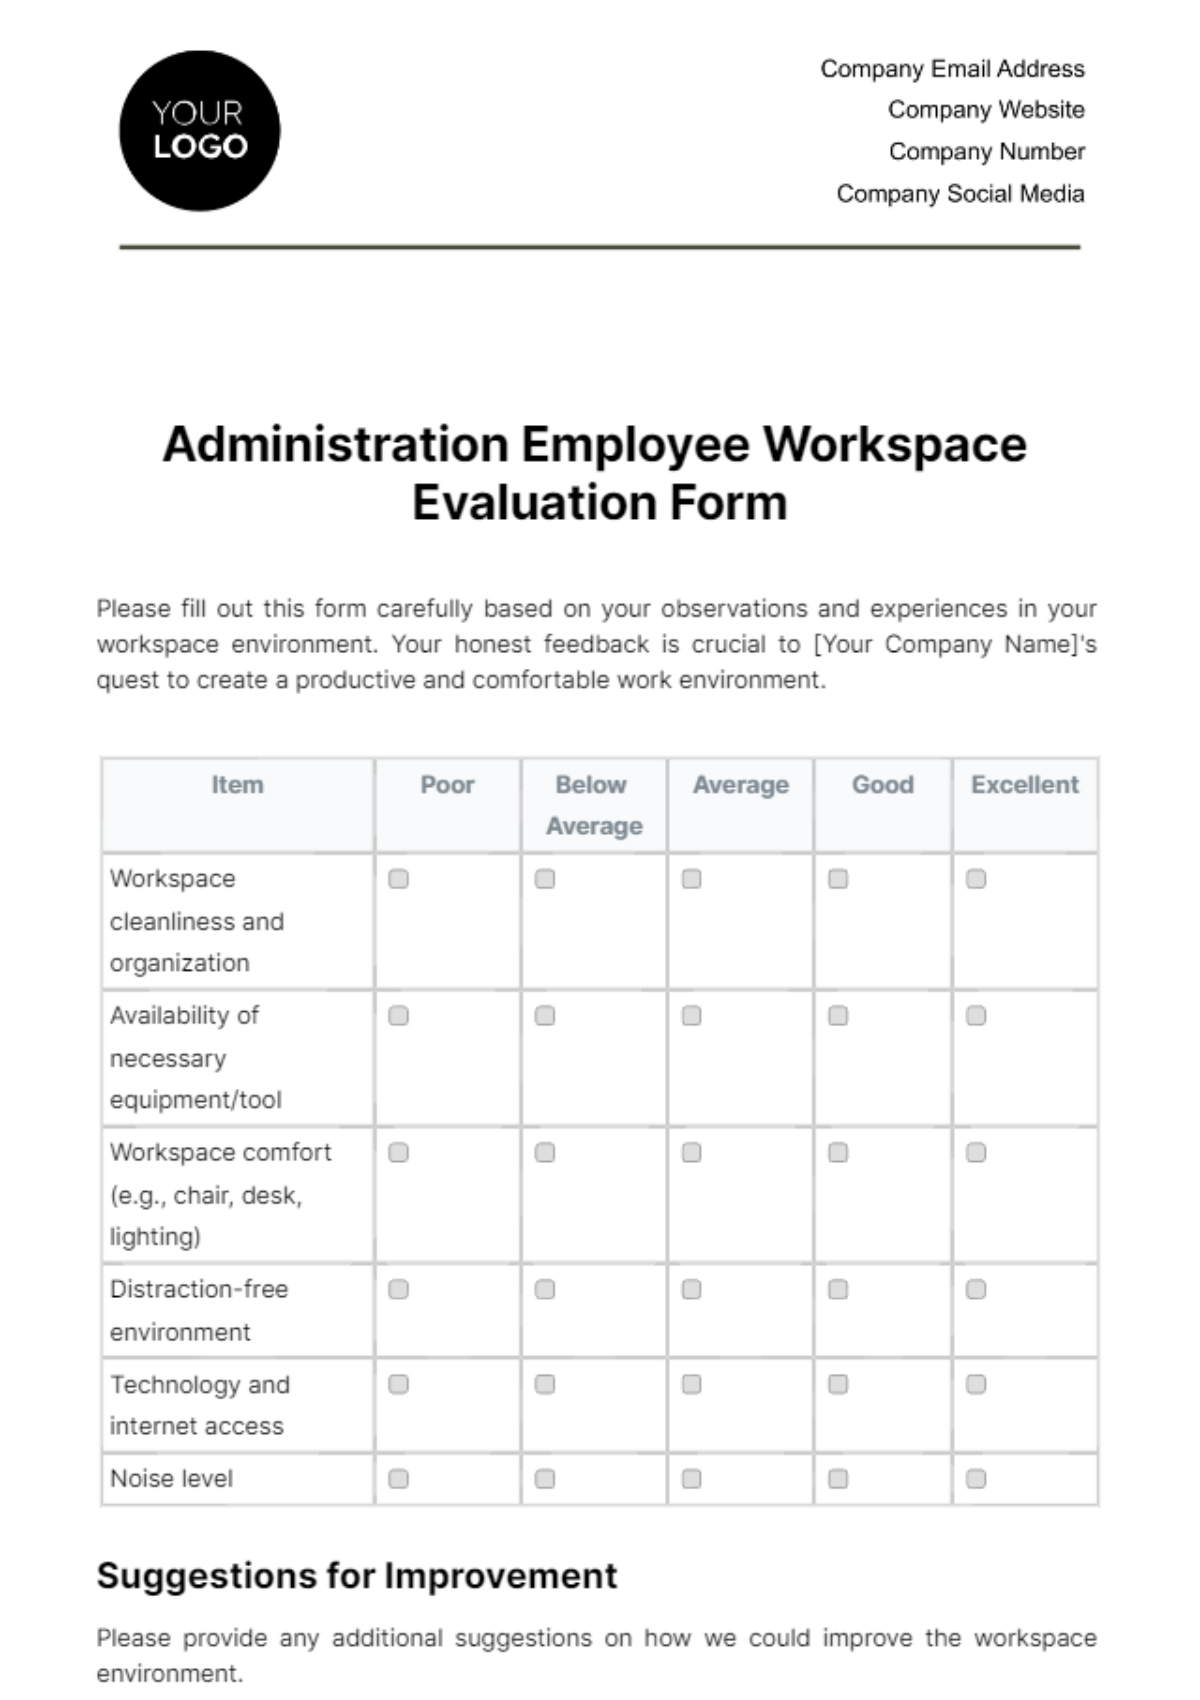 Free Administration Employee Workspace Evaluation Form Template